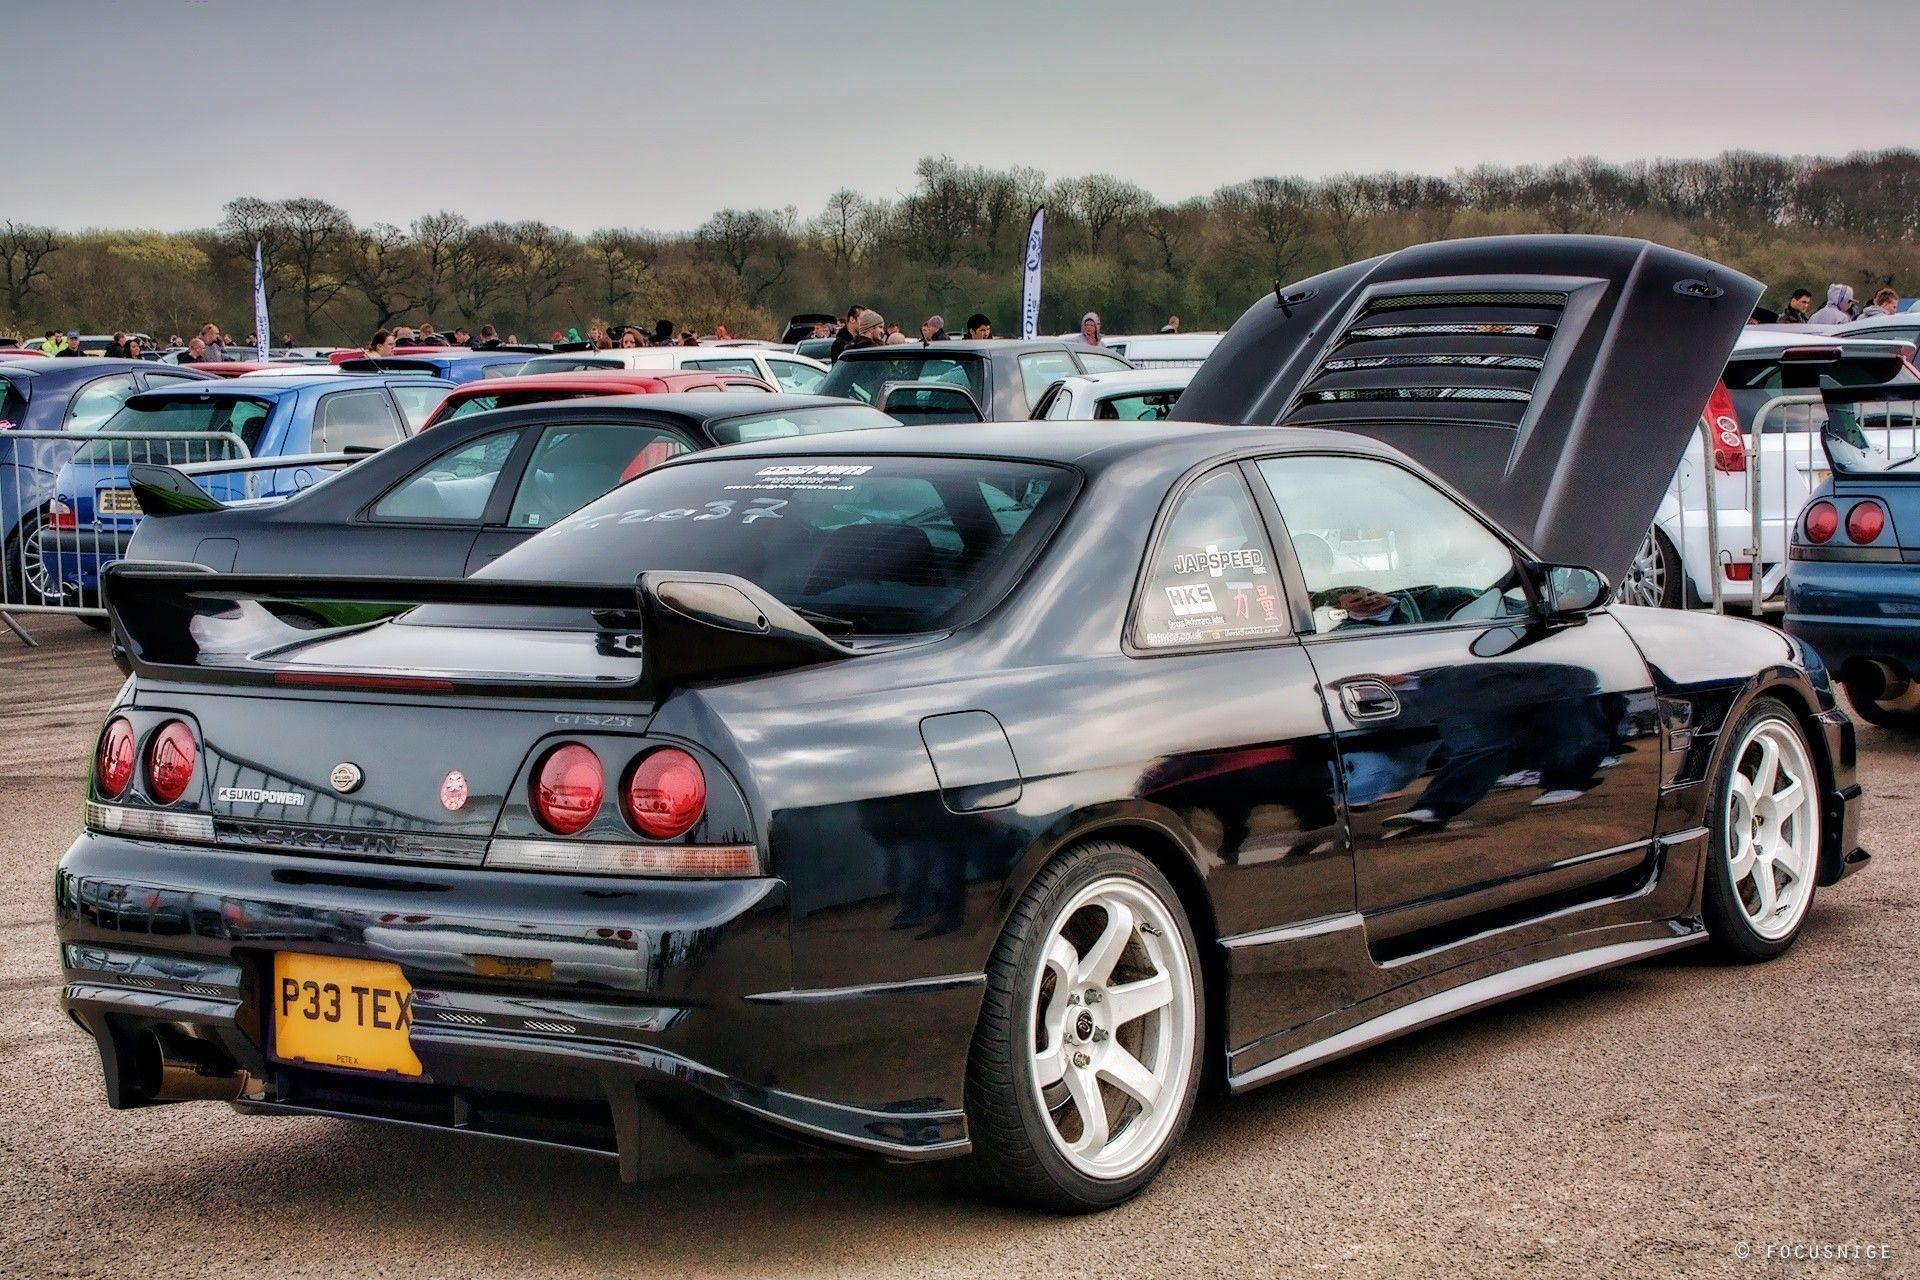 R33 Gtr Wallpaper background picture